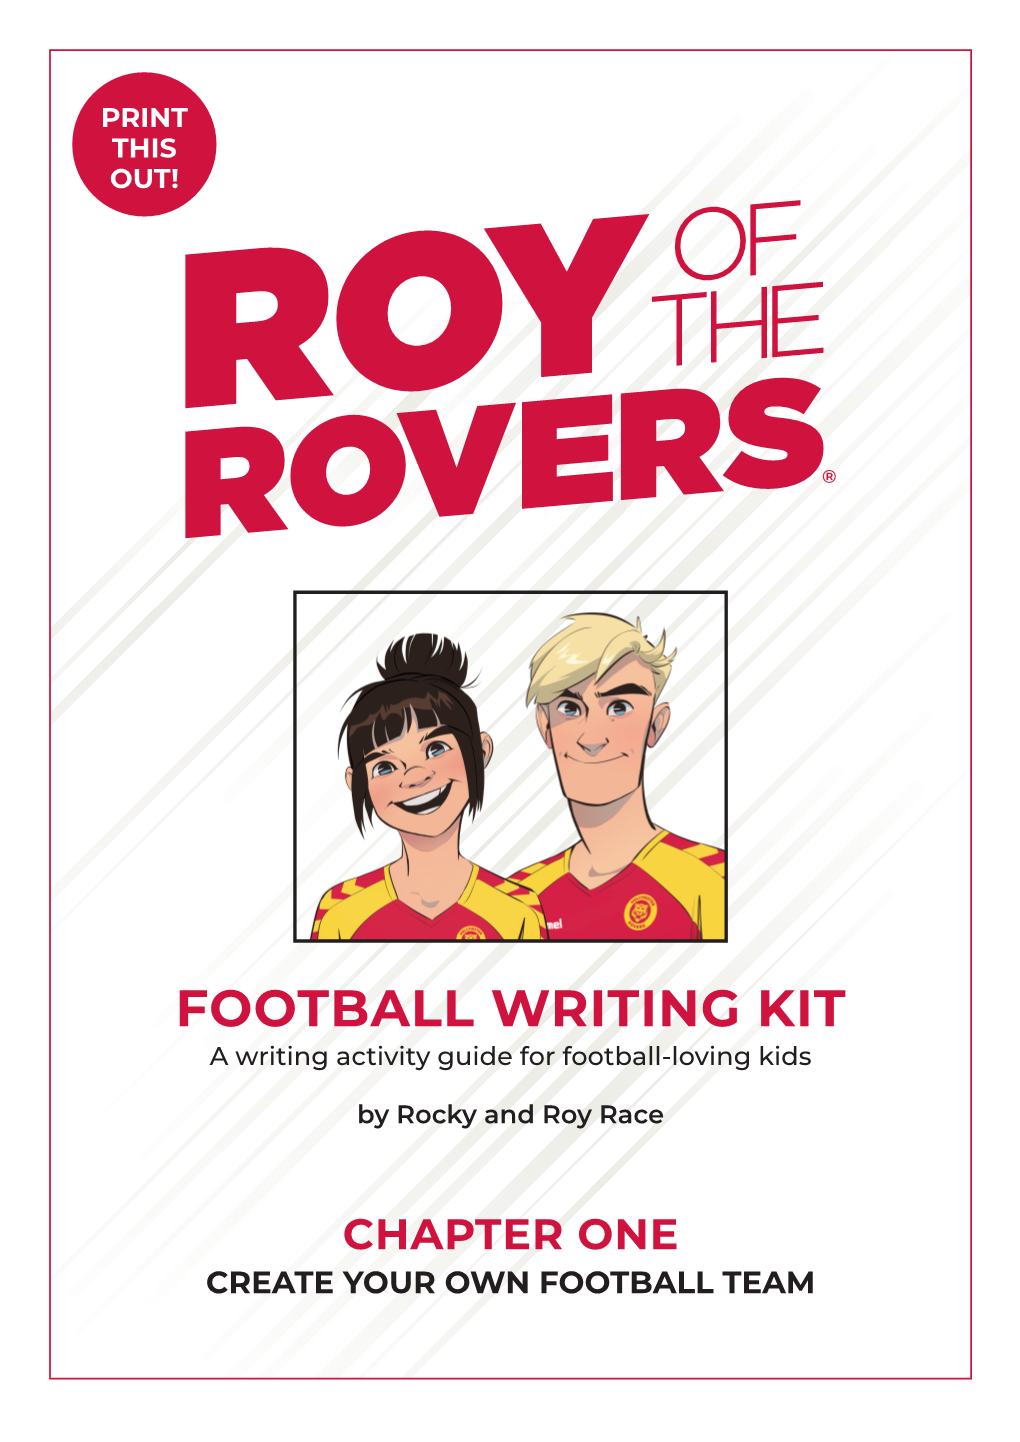 FOOTBALL WRITING KIT a Writing Activity Guide for Football-Loving Kids